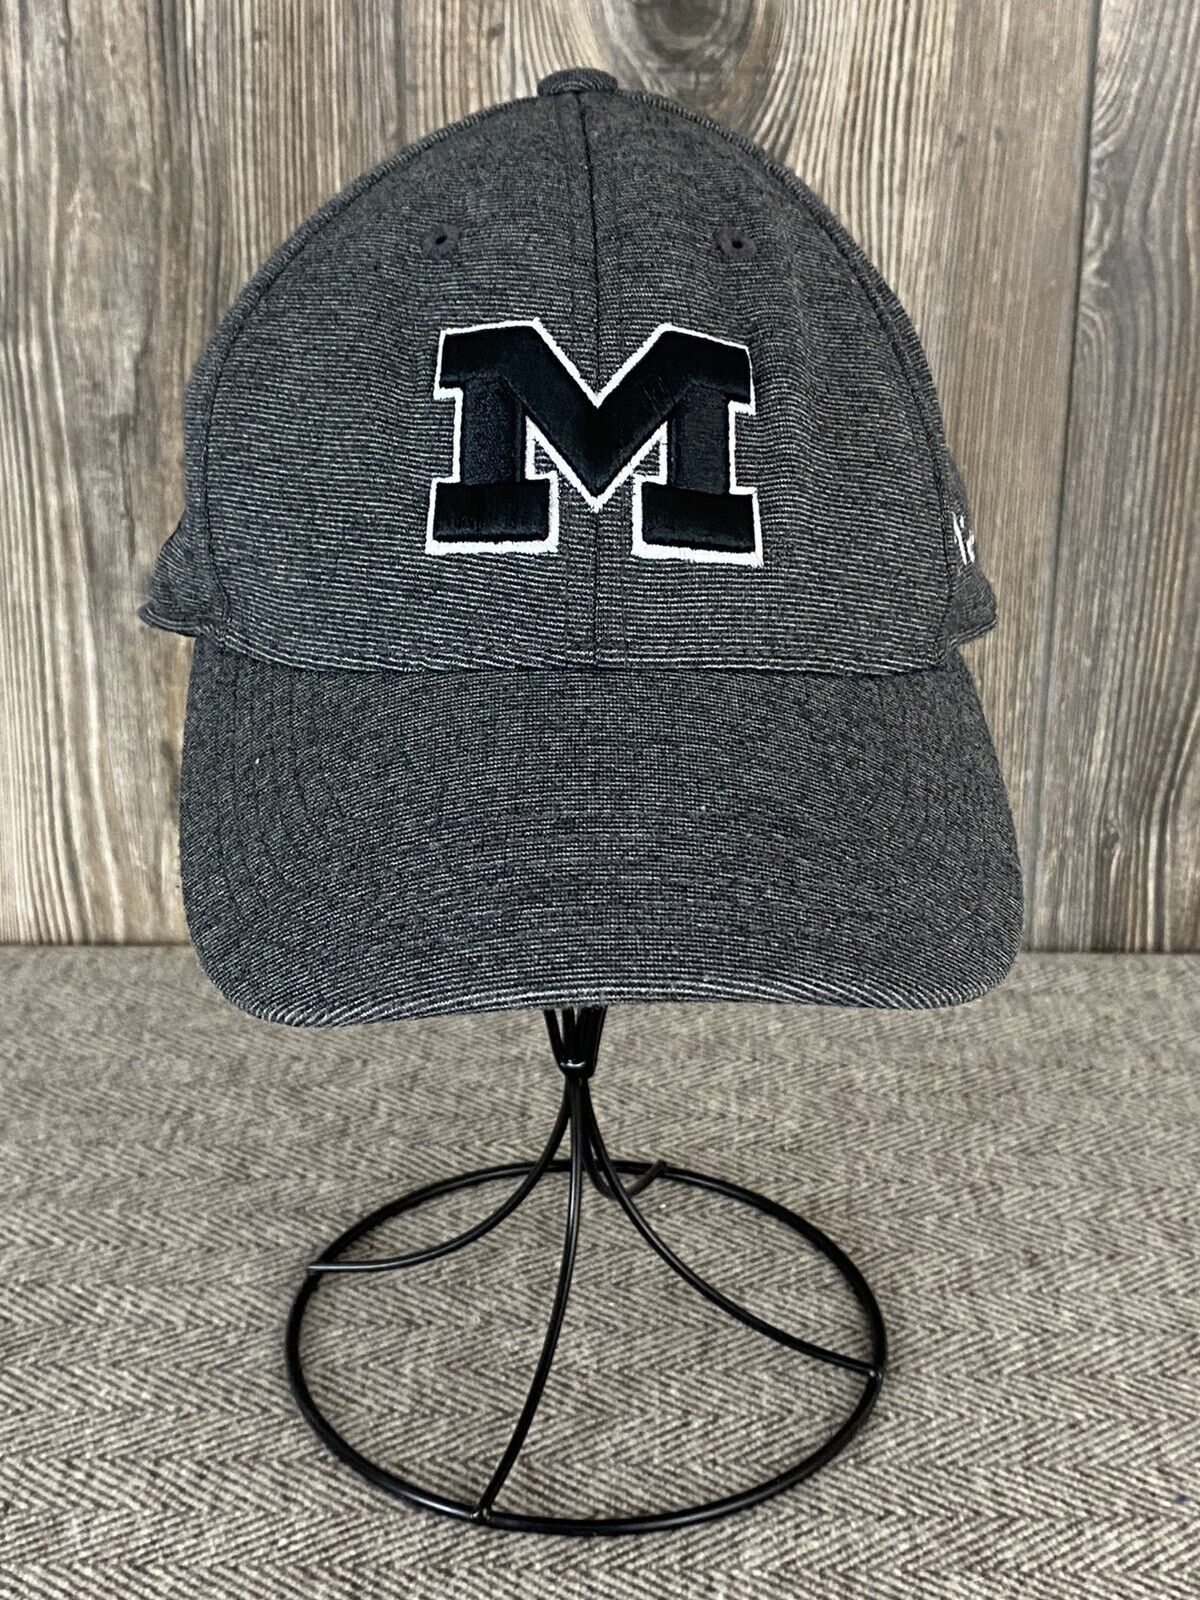 University Of Michigan Wolverines Fitted Ball Cap "One Size" Embroidered Logo's - $9.50